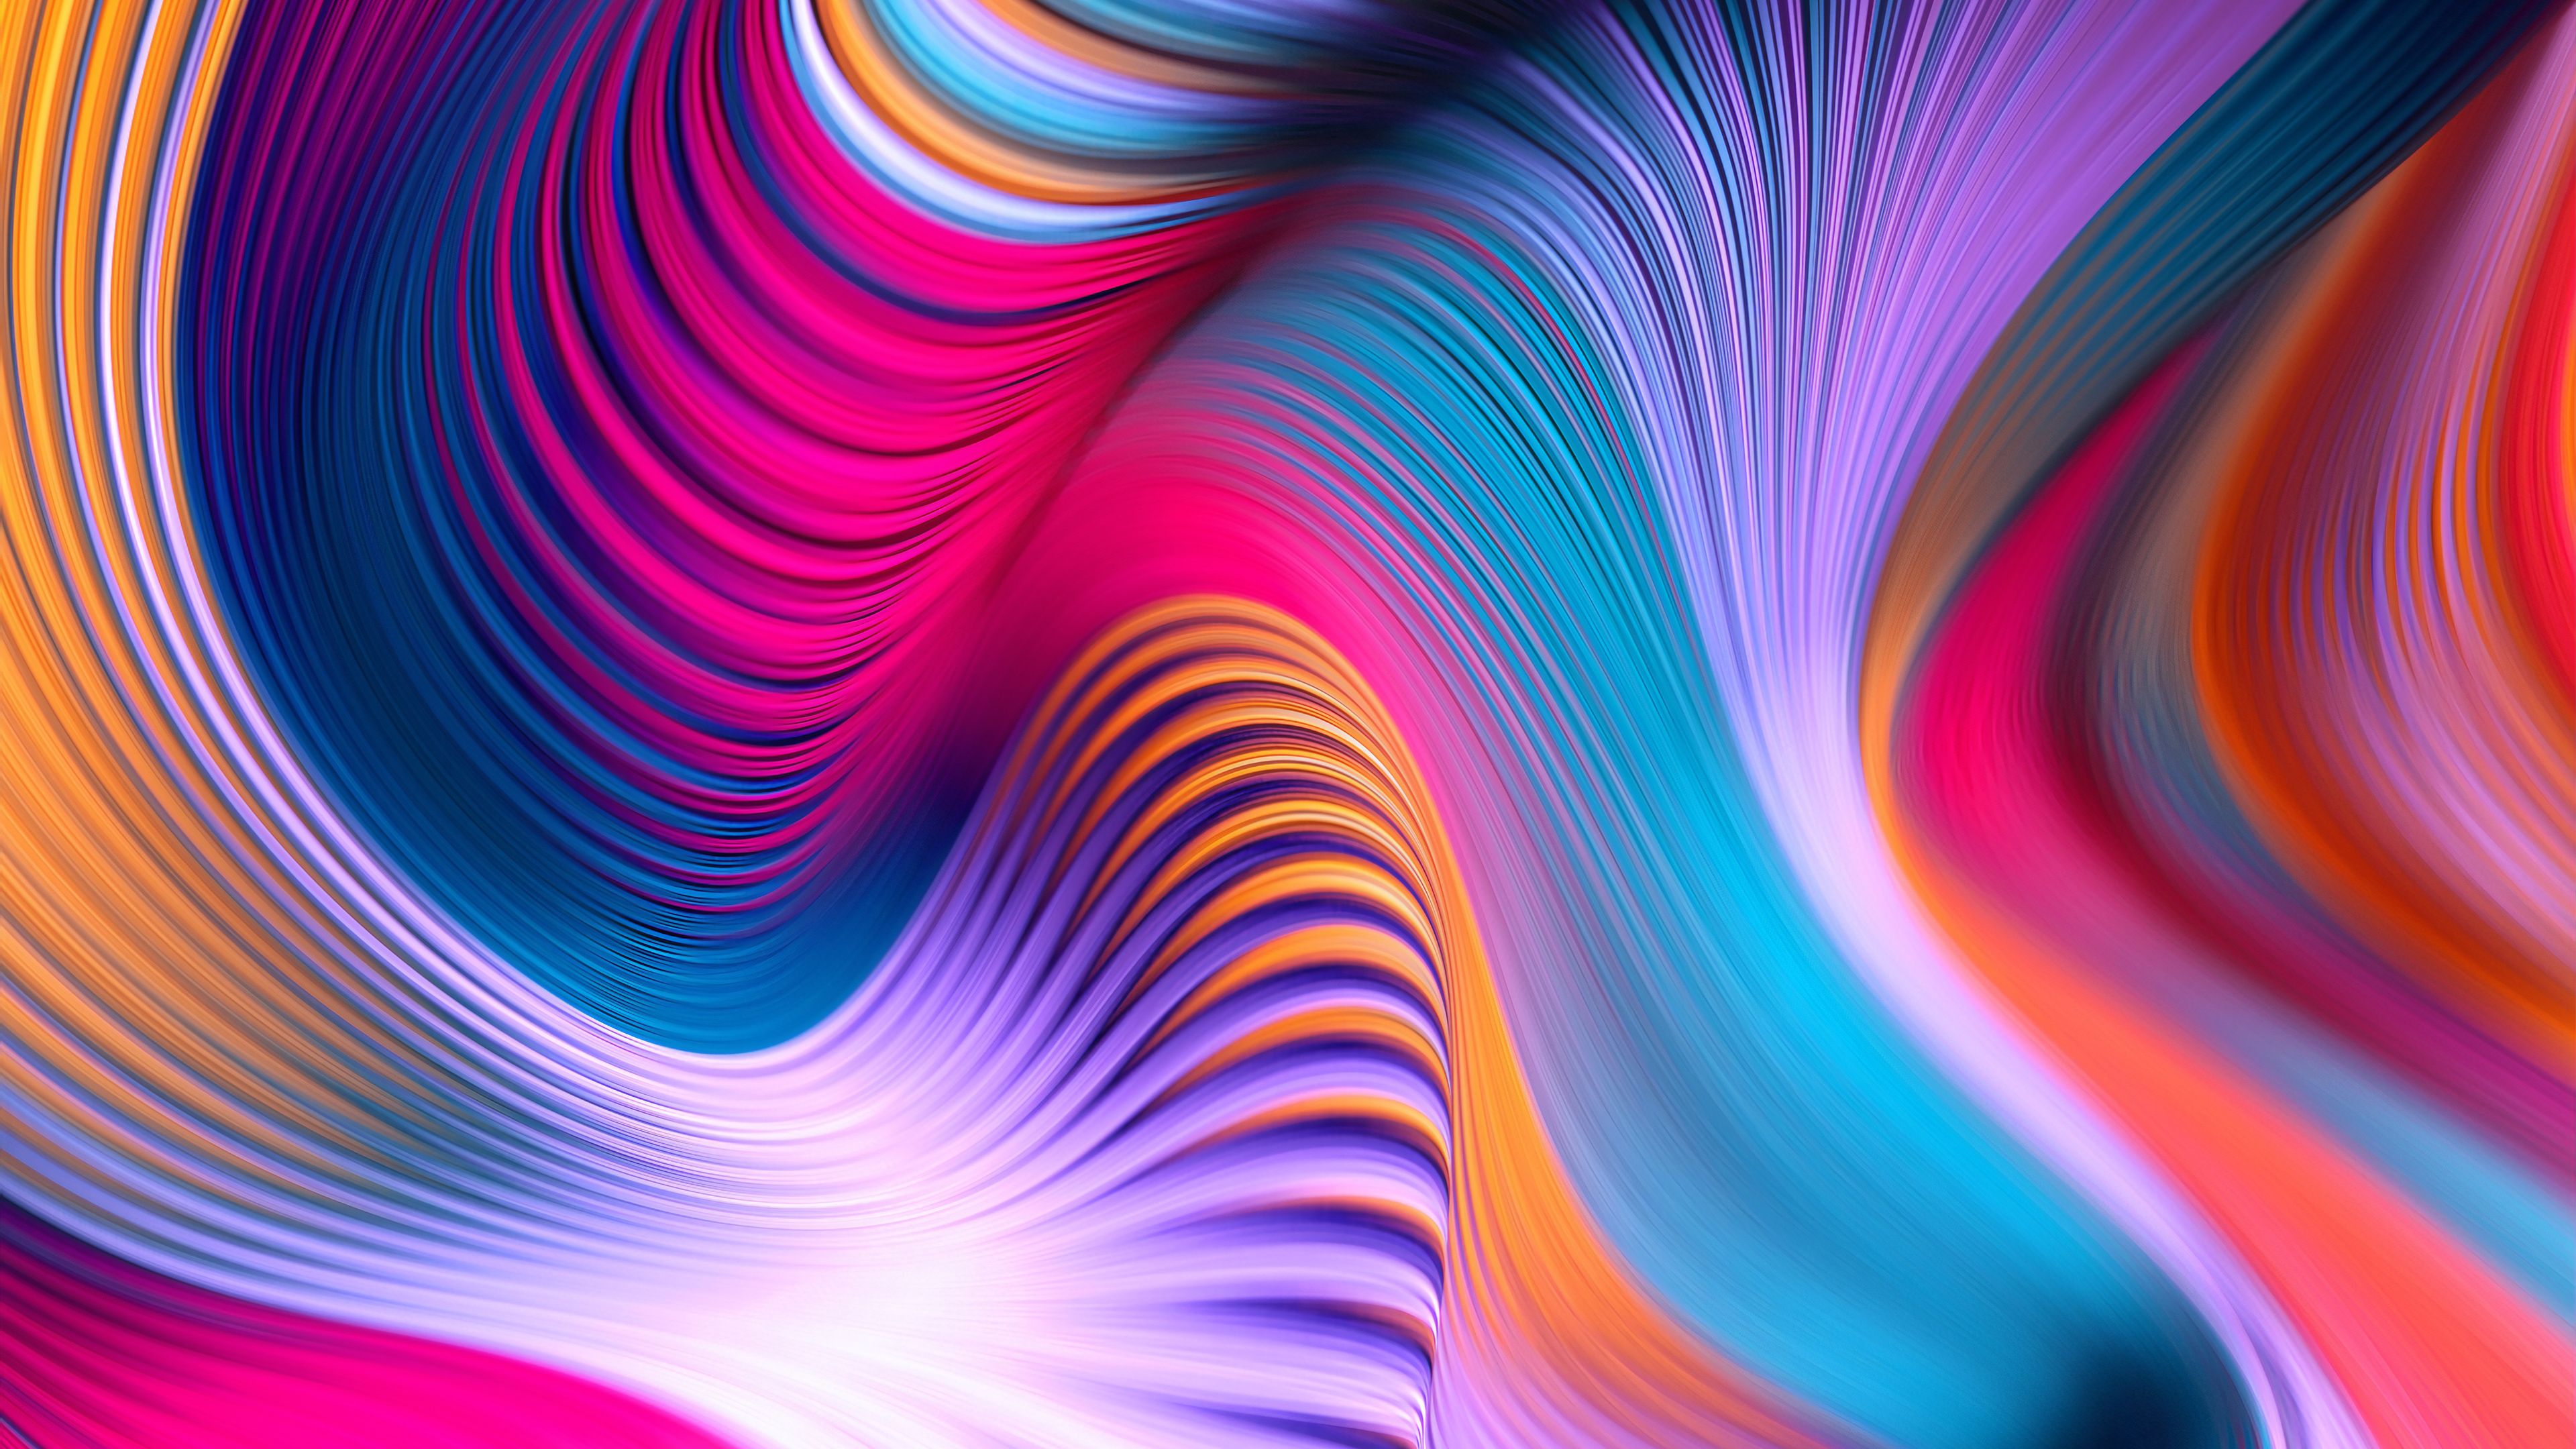 Abstract Colorful HD Wallpaper 4k